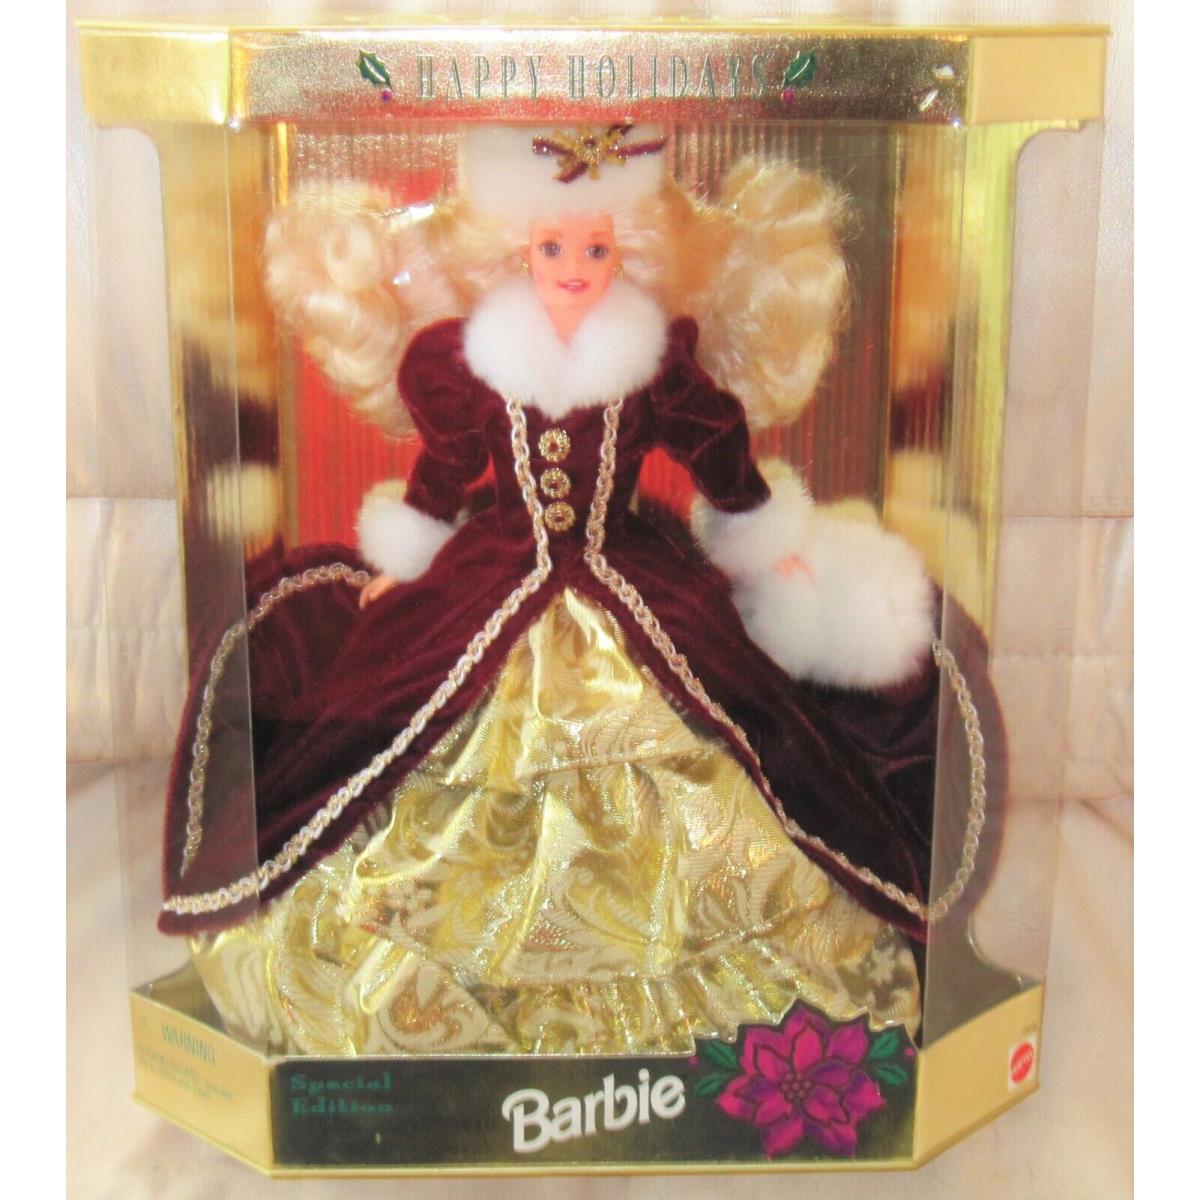 1996 Mattel Special Edition Happy Holidays Barbie Doll